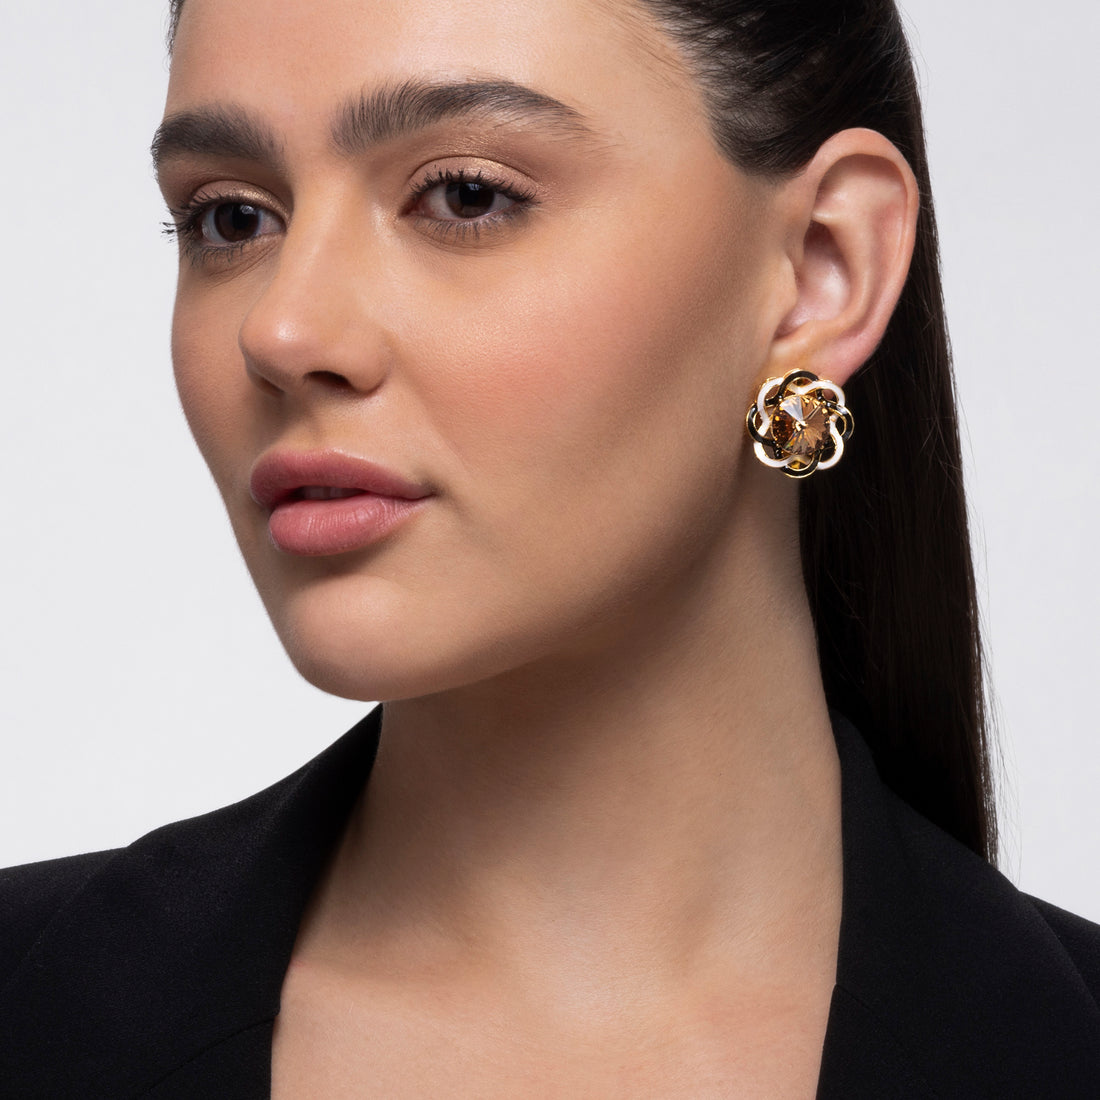 PRAO's Crystanamel Floral Studs